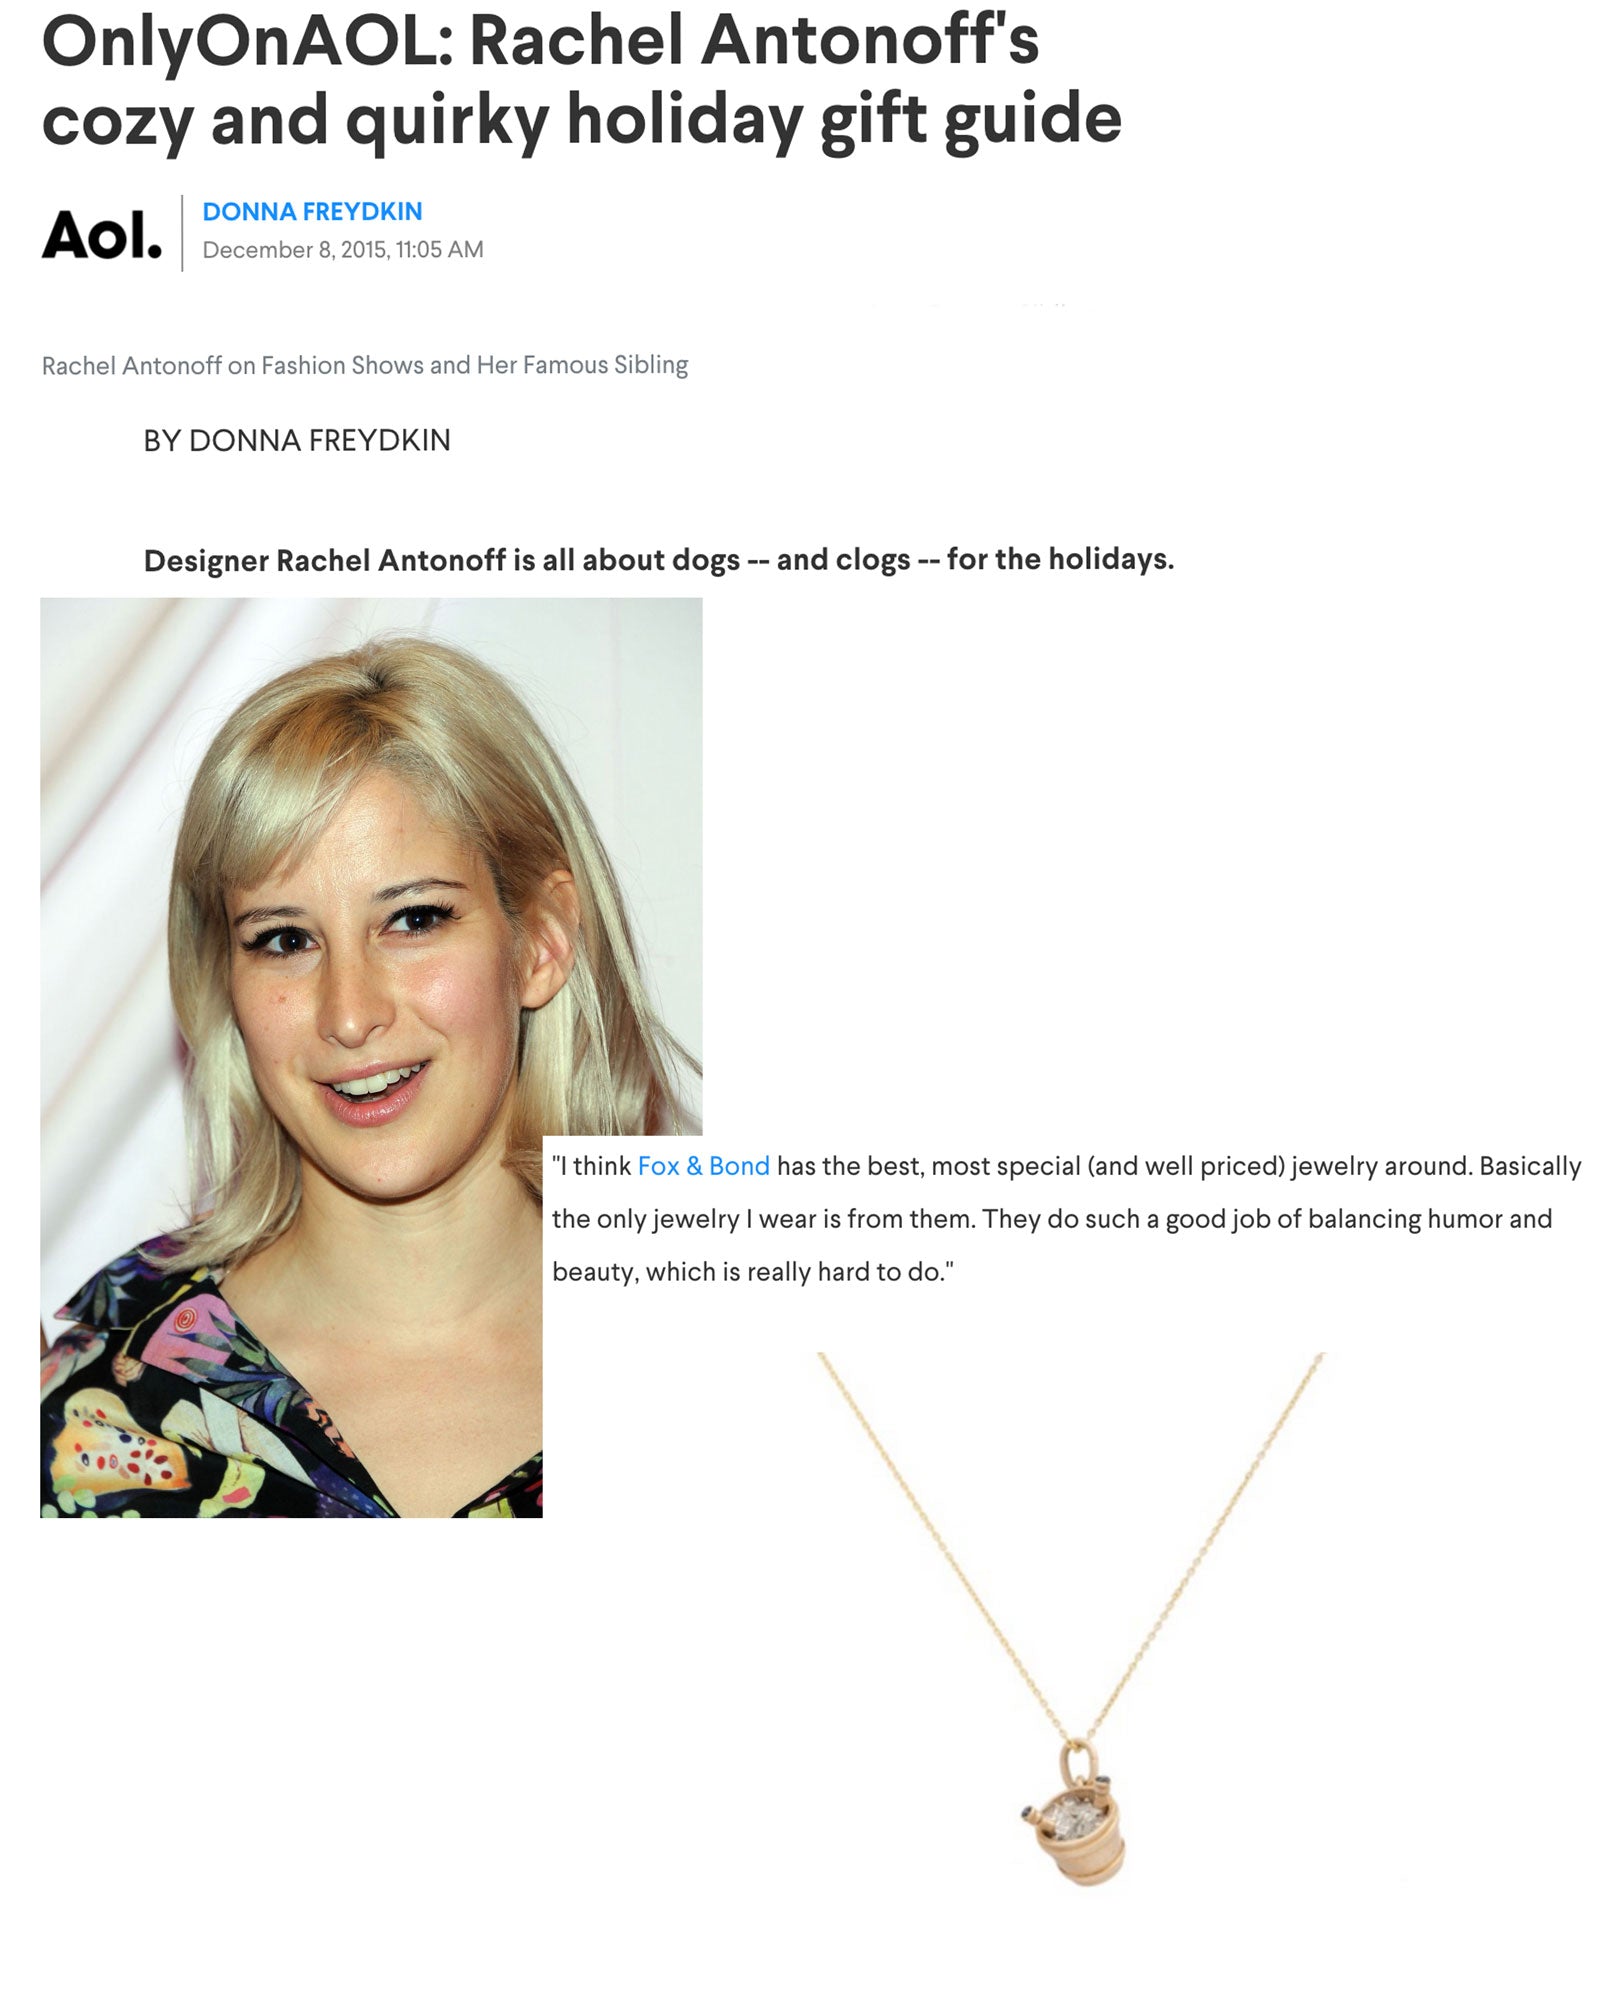 AOL: Rachel Antonoff's cozy and quirky holiday gift guide